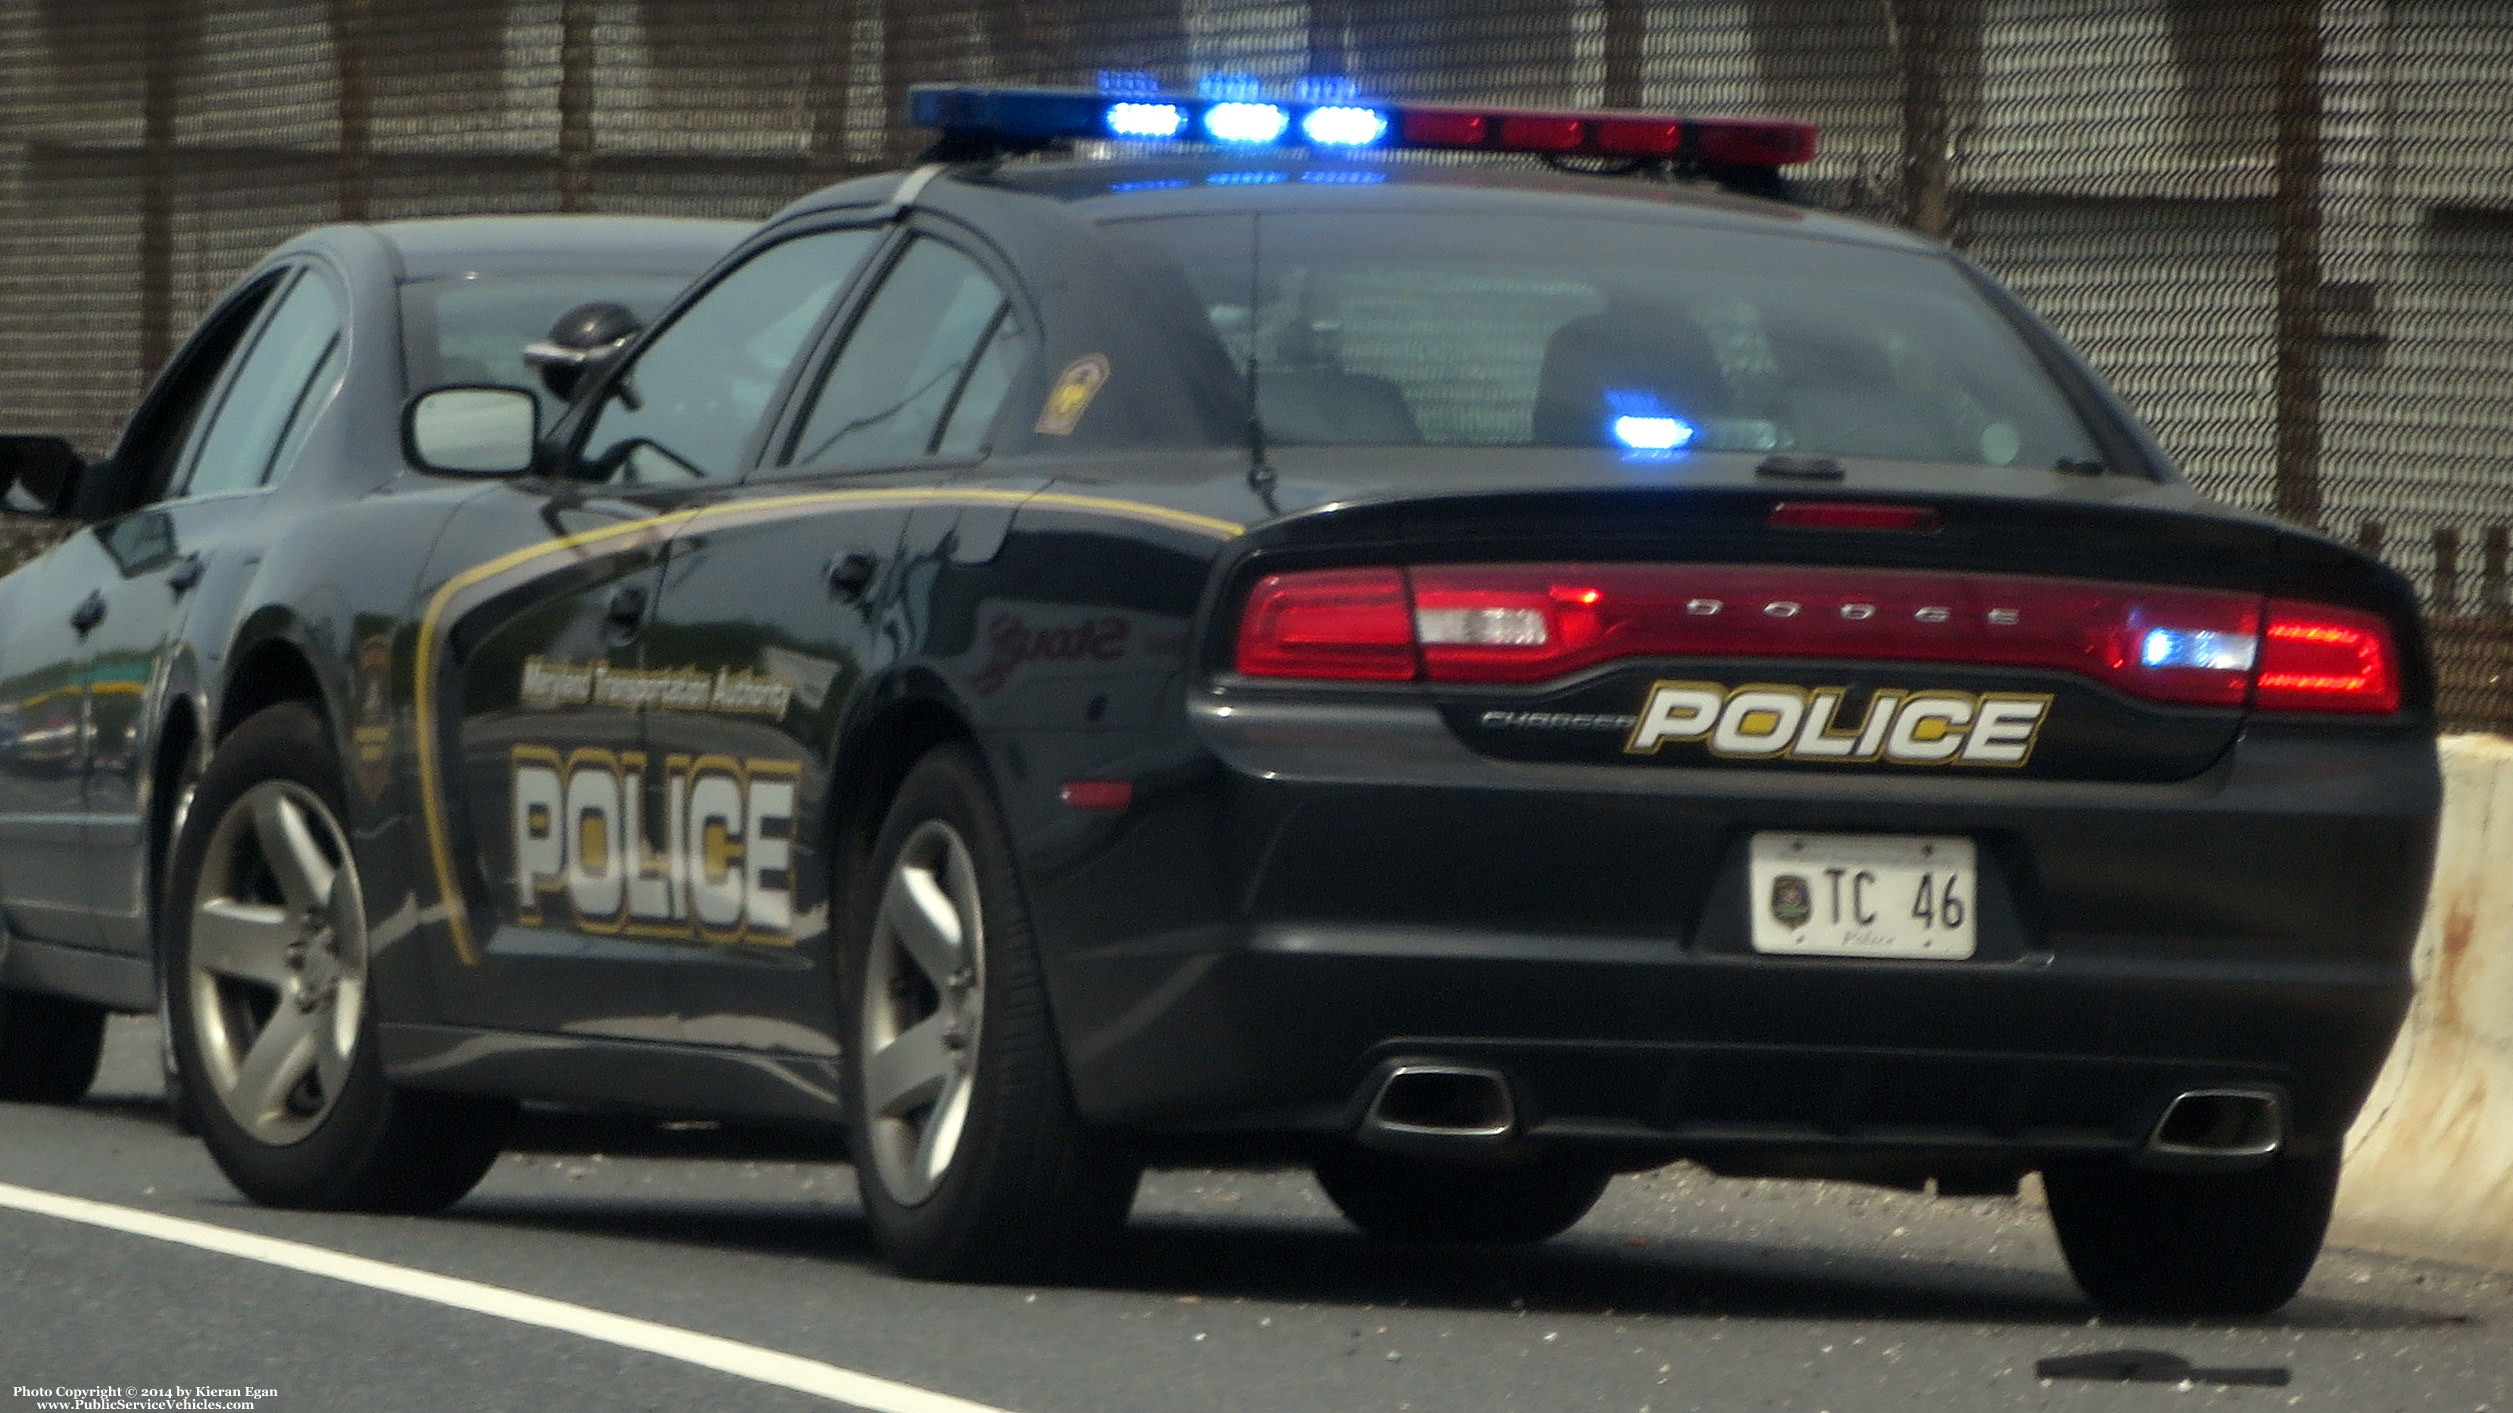 A photo  of Maryland Transportation Authority Police
            TC 46, a 2011-2014 Dodge Charger             taken by Kieran Egan